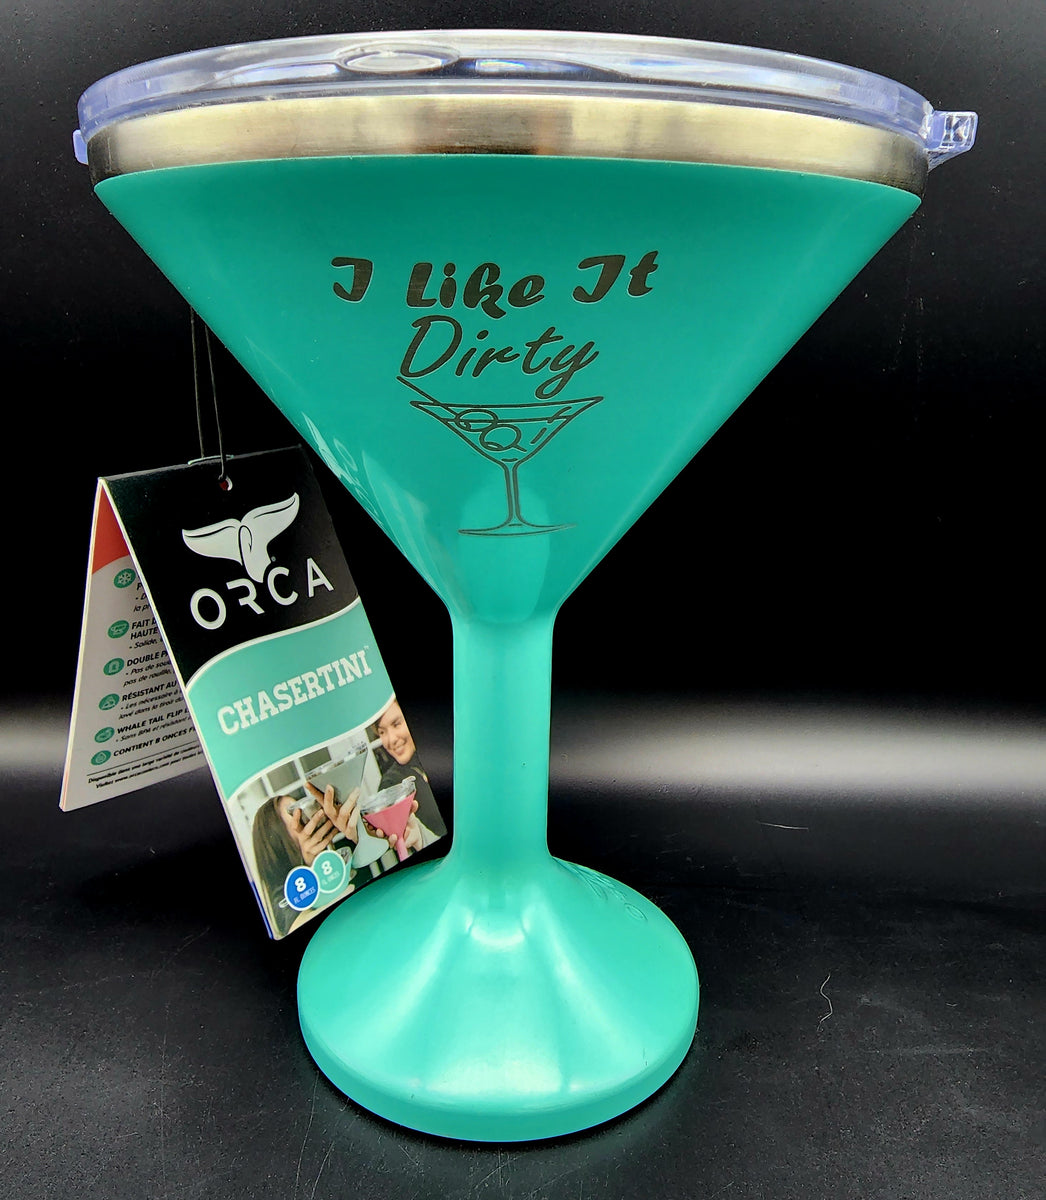 ORCA Chasertini Insulated Martini Style Sipping Cup with Lid -  Stainless Steel for Outdoor, Picnic, Poolside, Beach or Patio Party - Pink: Martini  Glasses